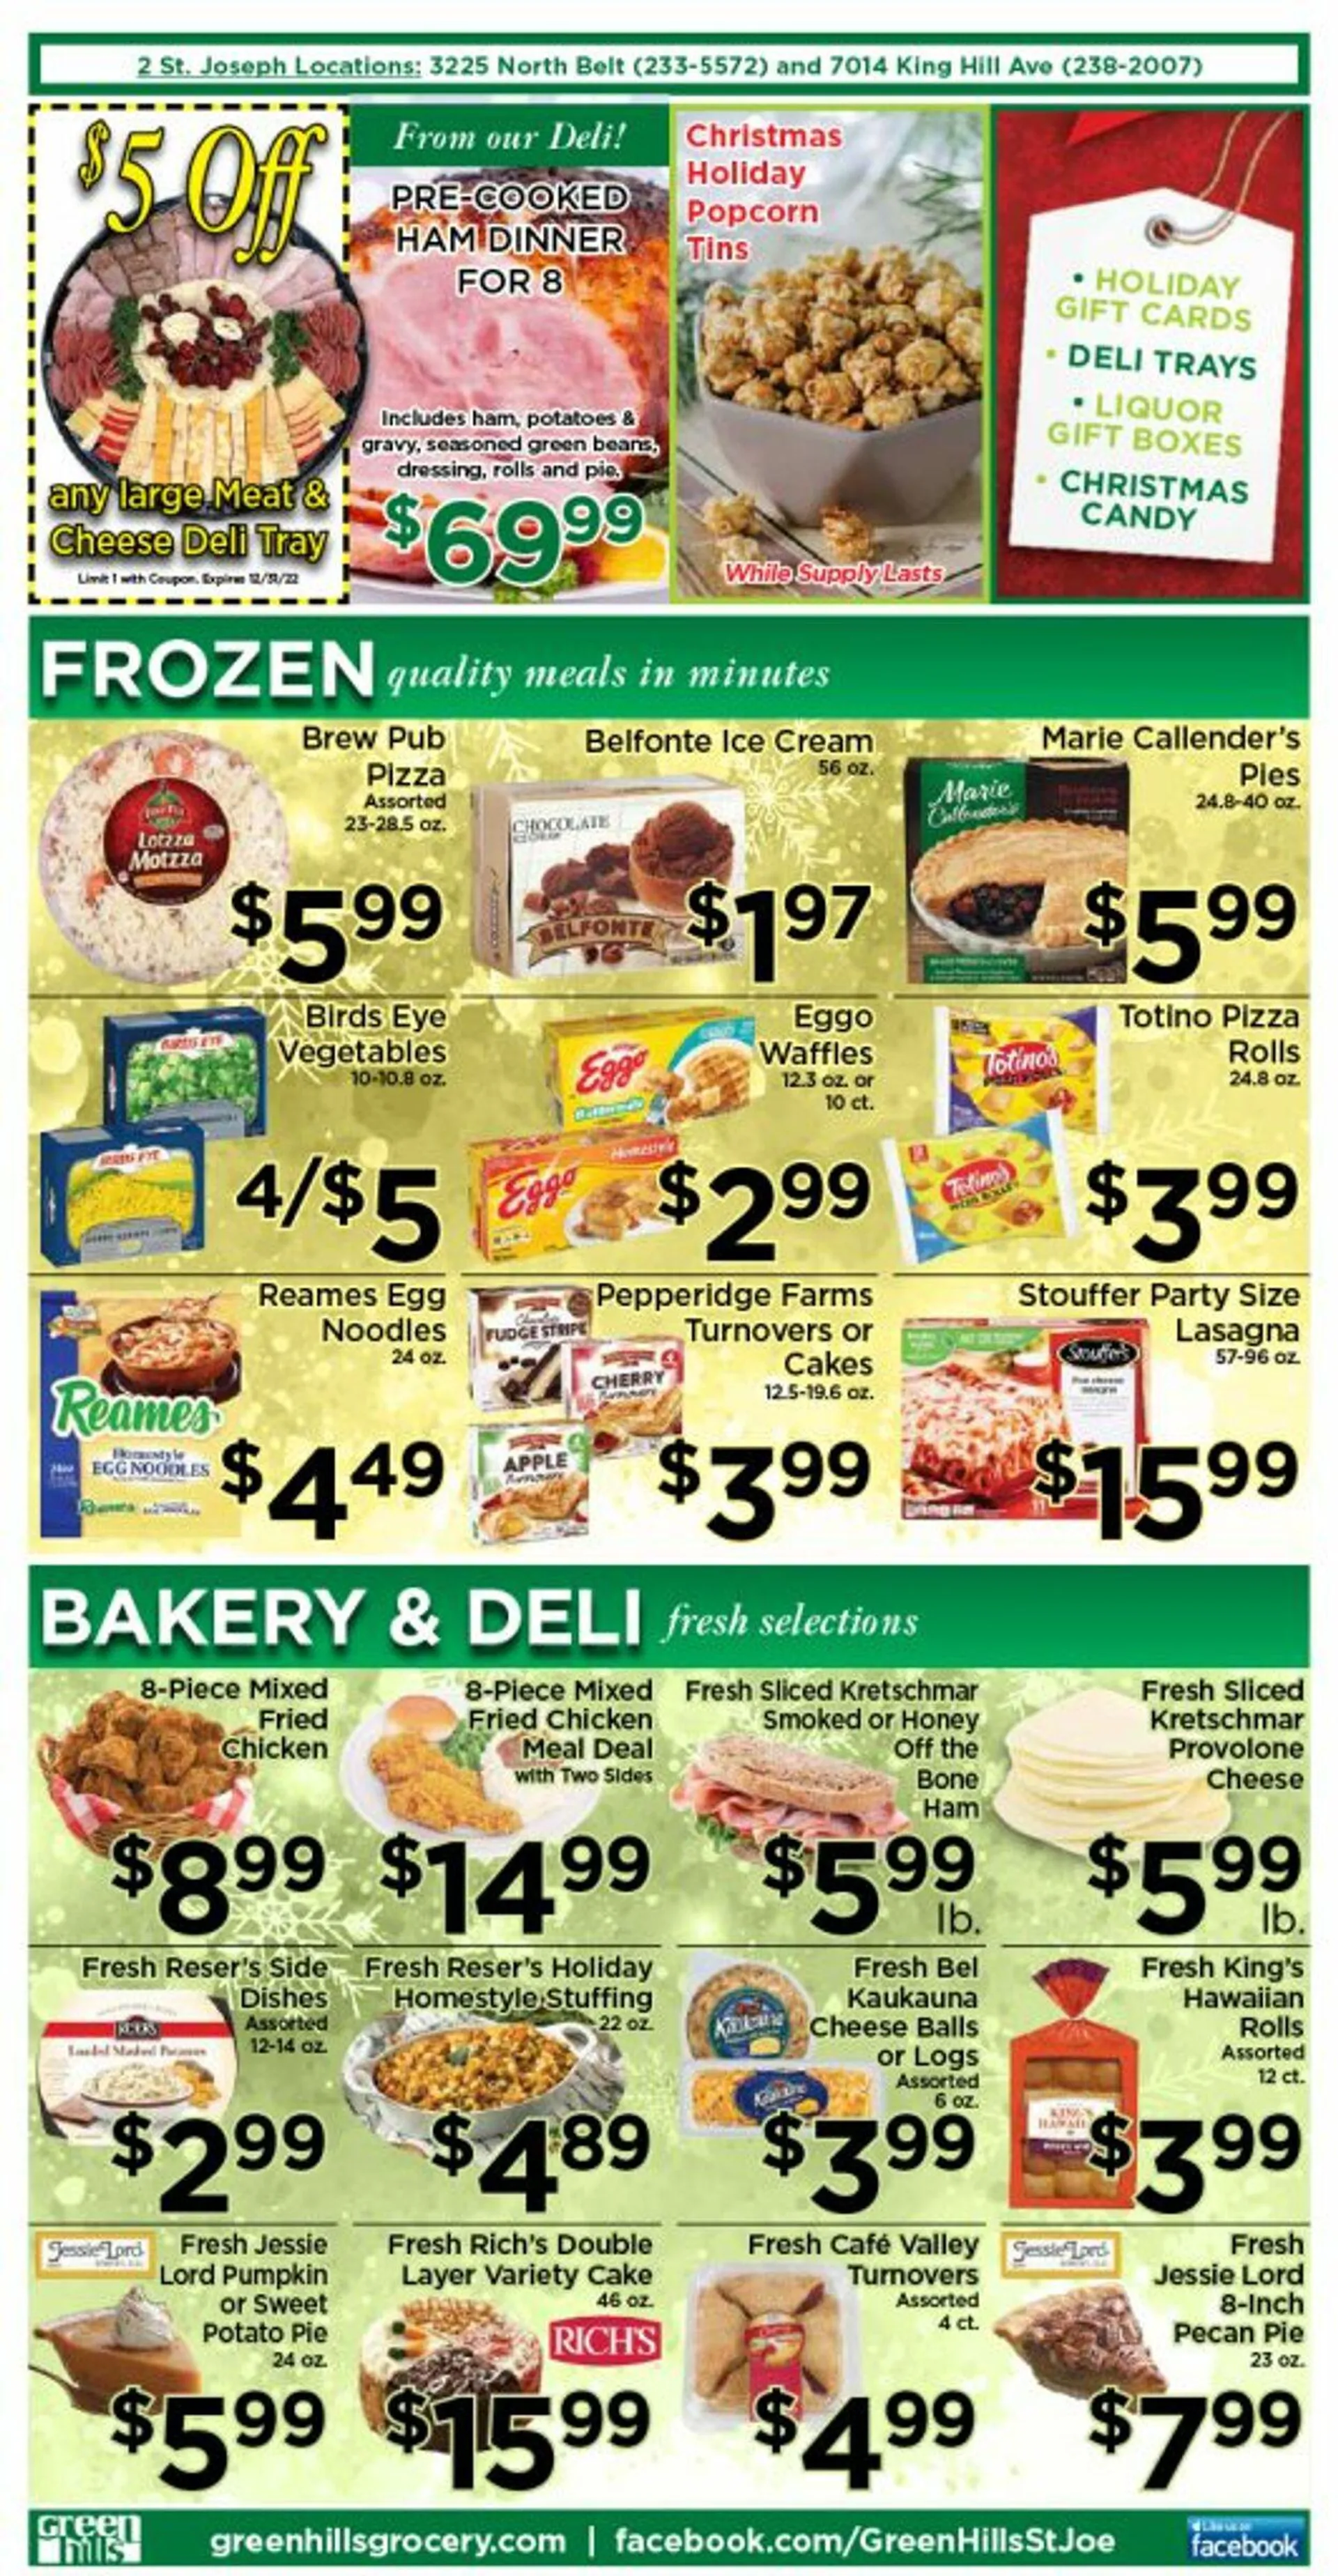 Green Hills Grocery Current weekly ad - 3